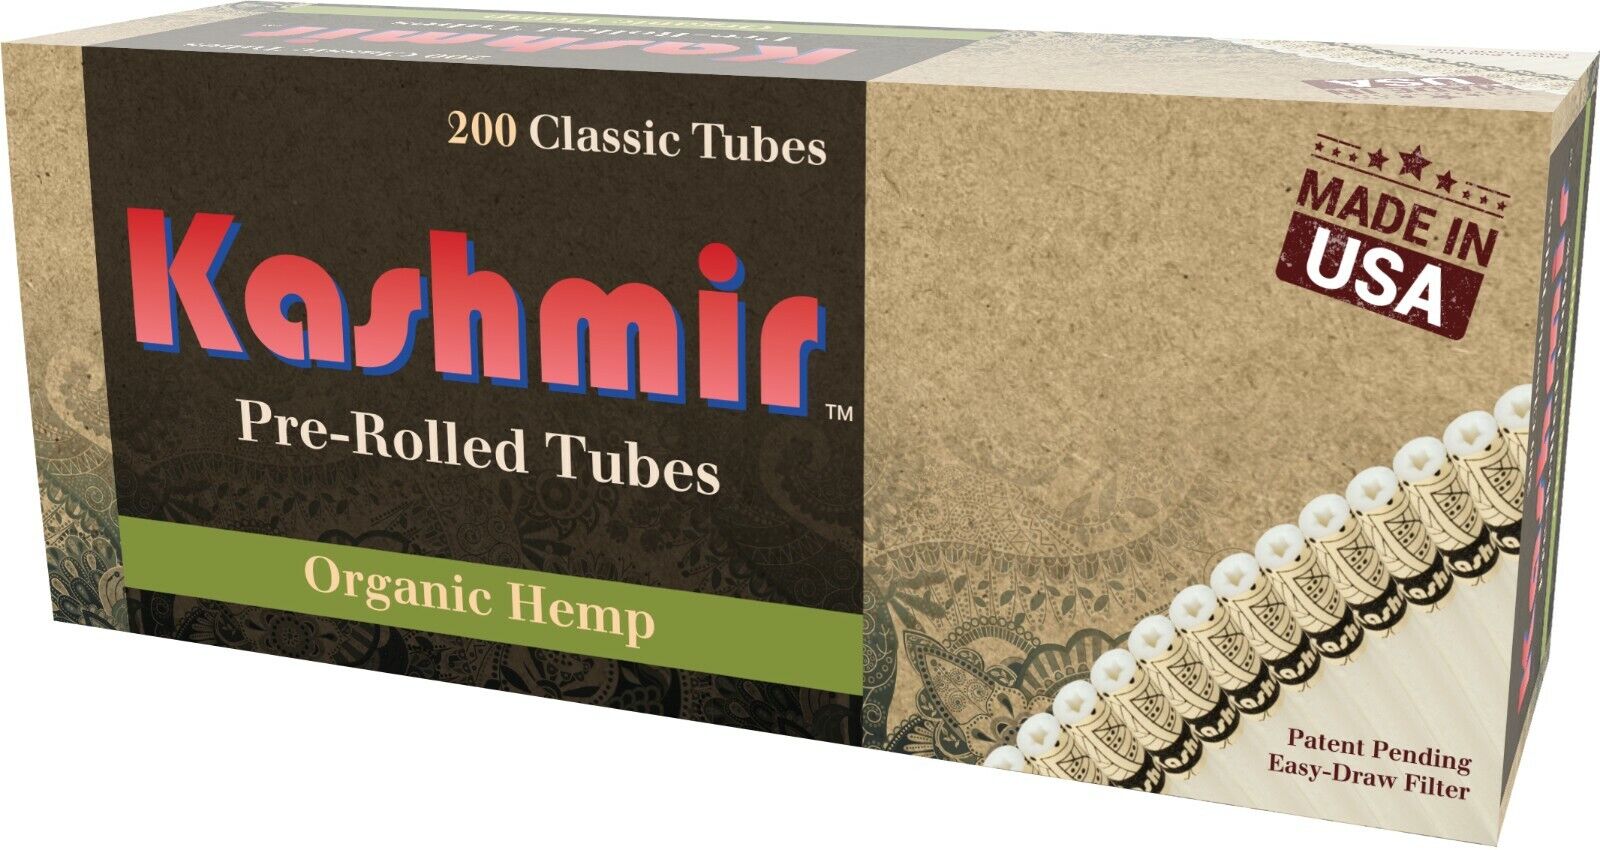  Kashmir Pre-Rolled Cigarettes Carton Classic Tubes for Smoking - One Pack 200ct